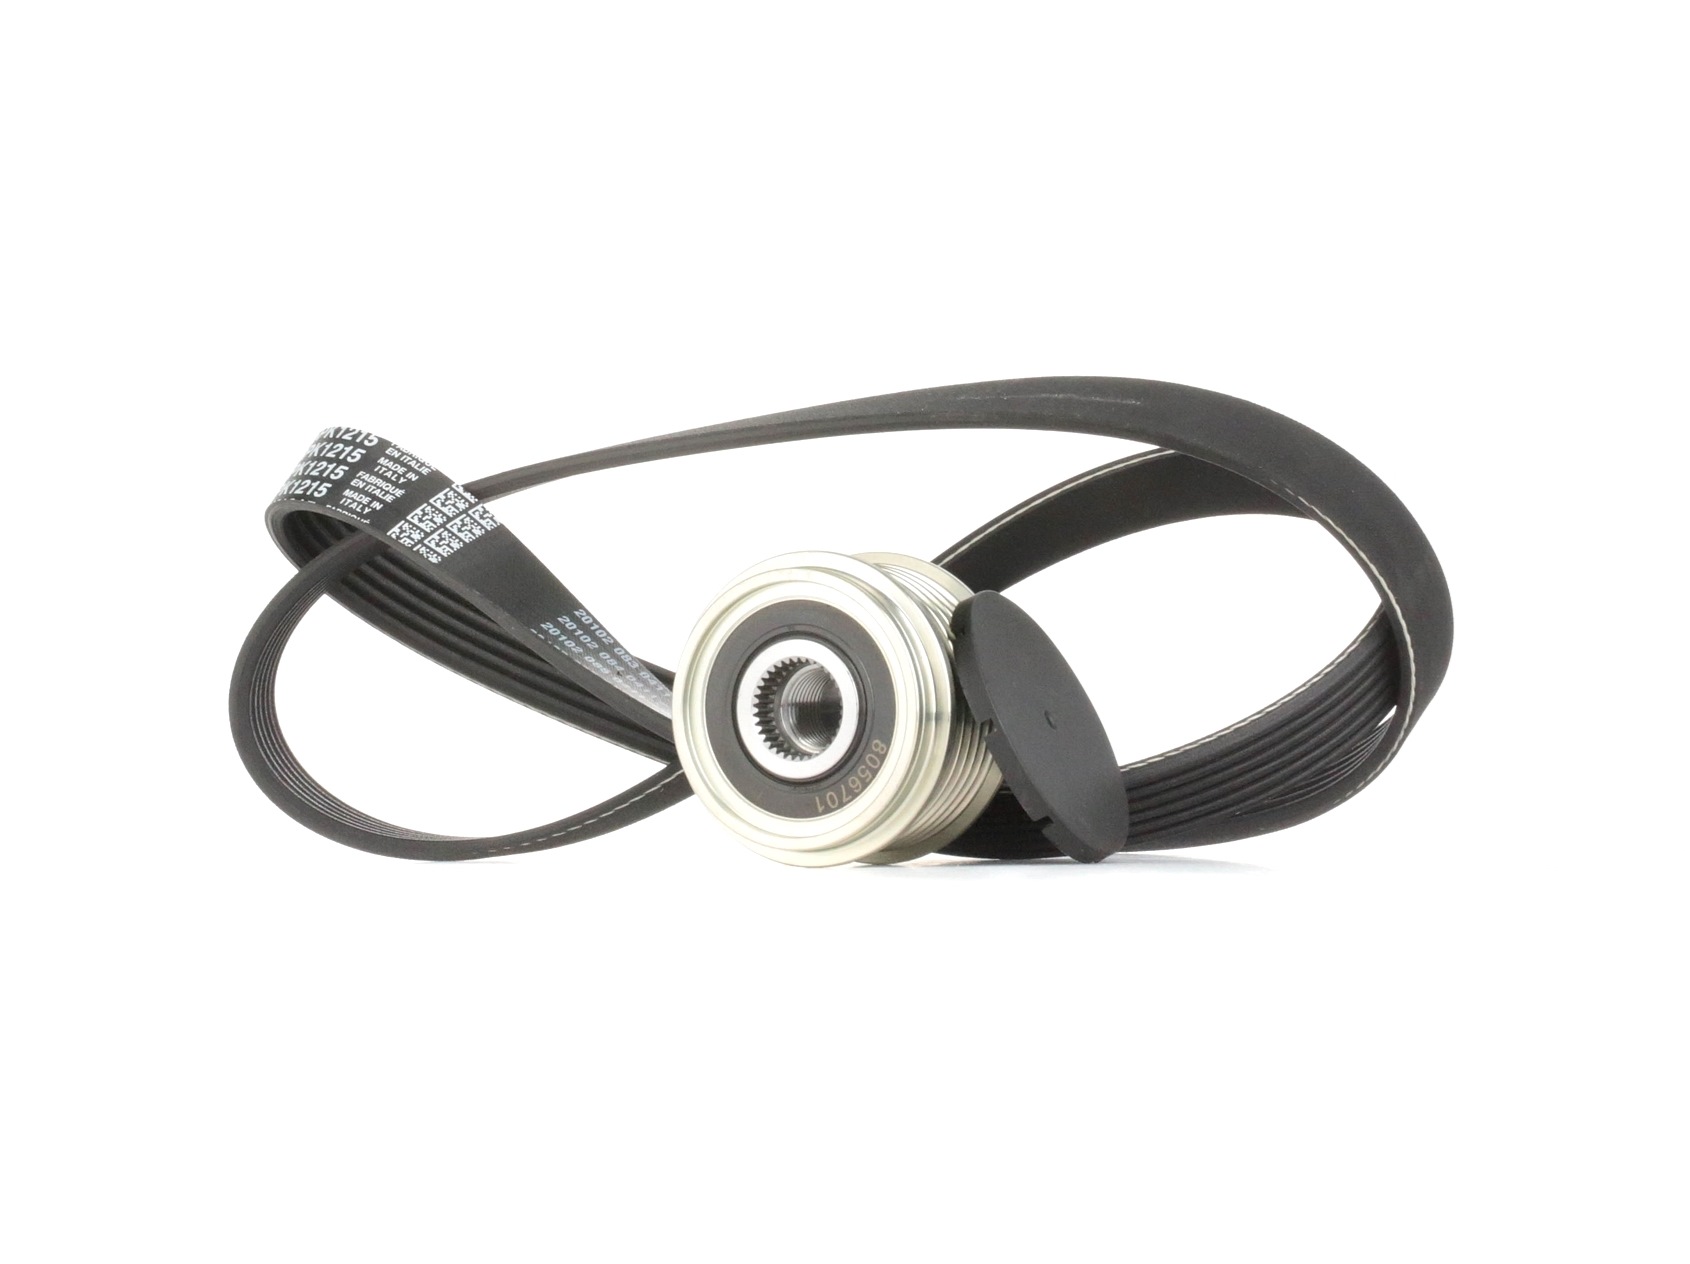 STARK SKRBS-1200438 V-Ribbed Belt Set Pulleys: with freewheel belt pulley, Check alternator freewheel clutch & replace if necessary